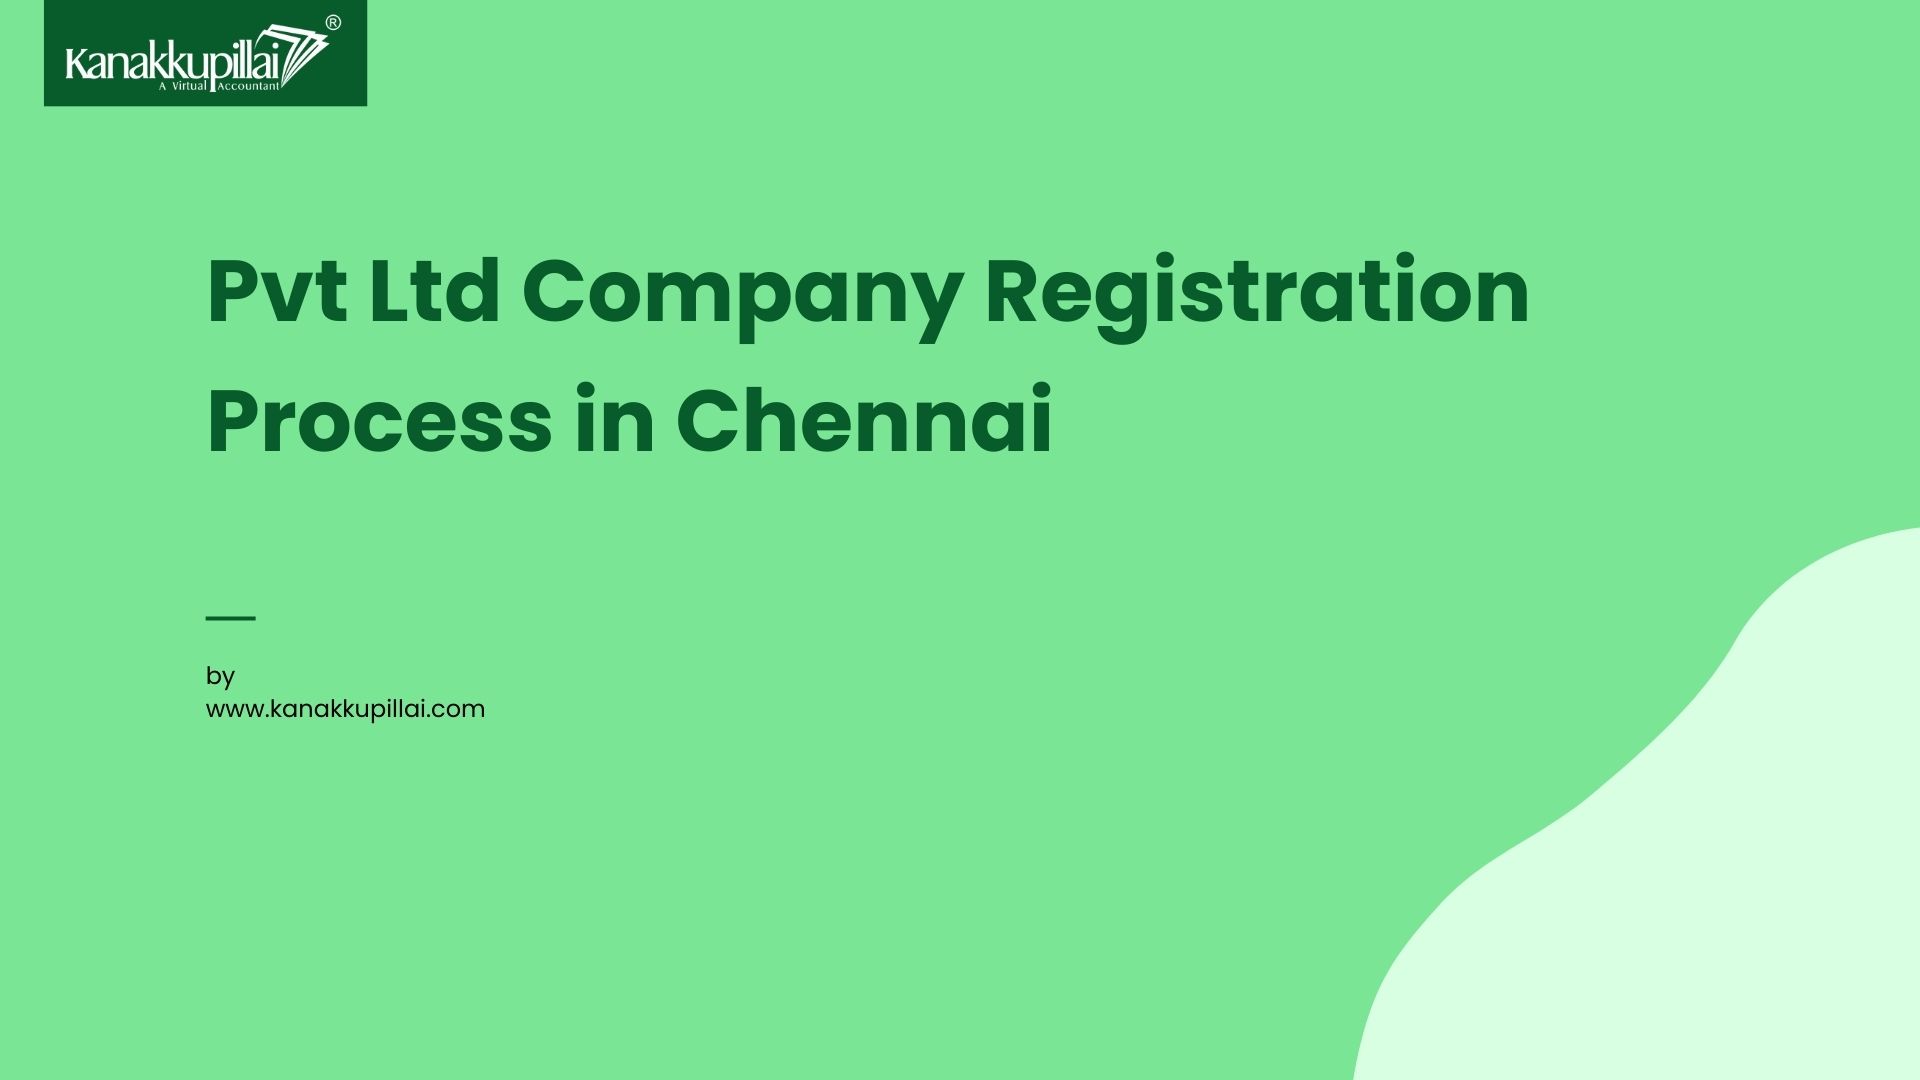 Decoding the Registration Process of a Private Limited Company in Chennai